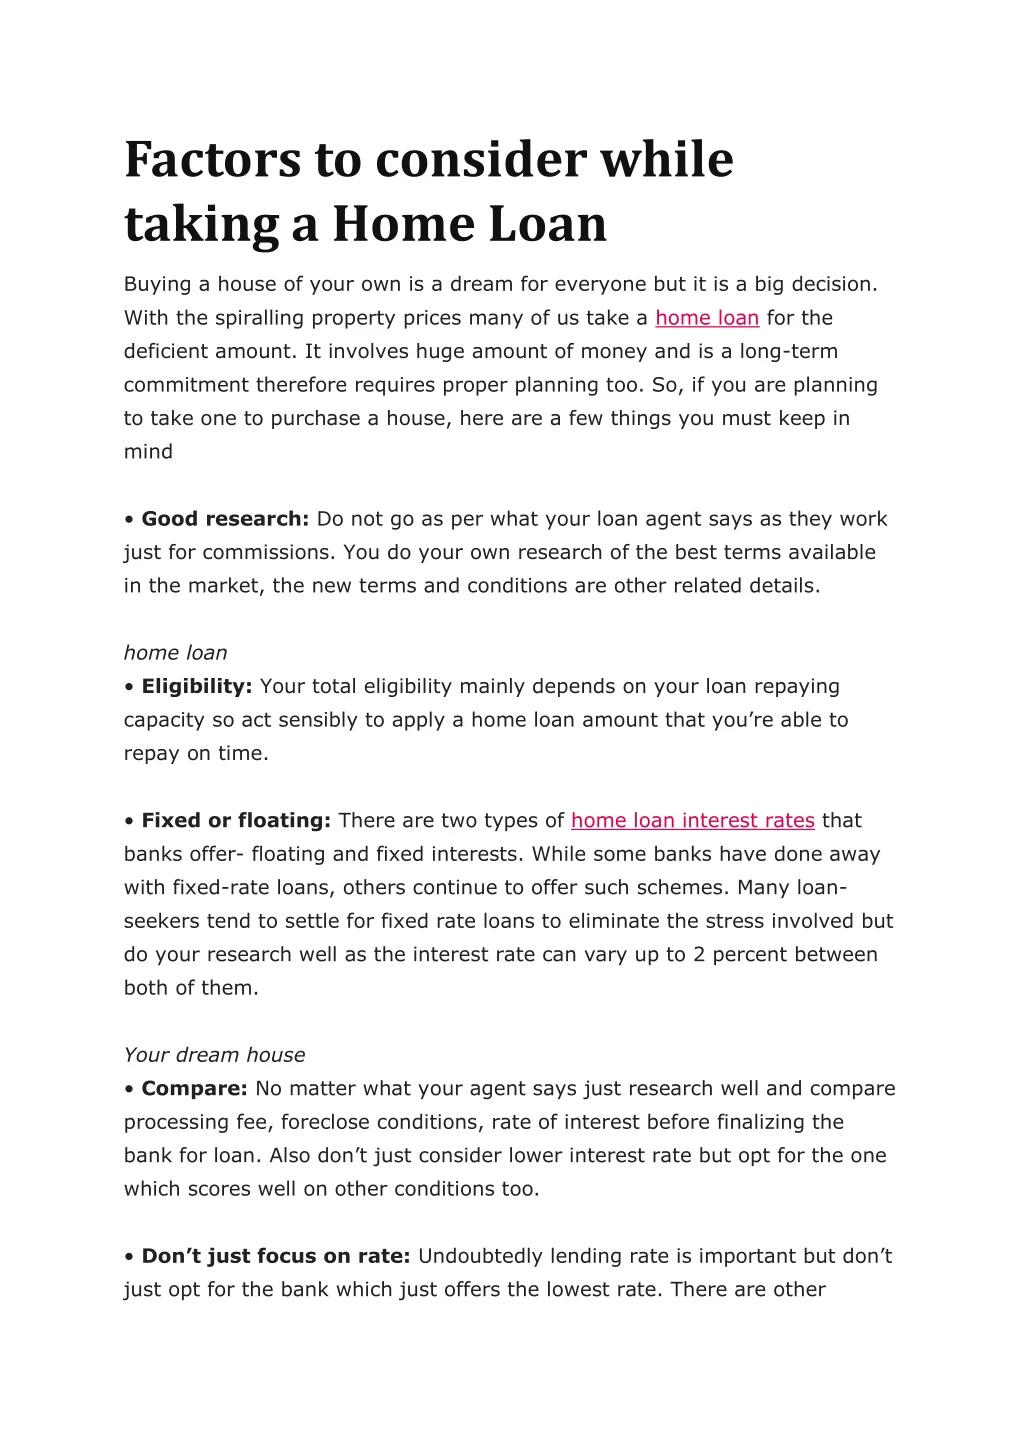 factors to consider while taking a home loan